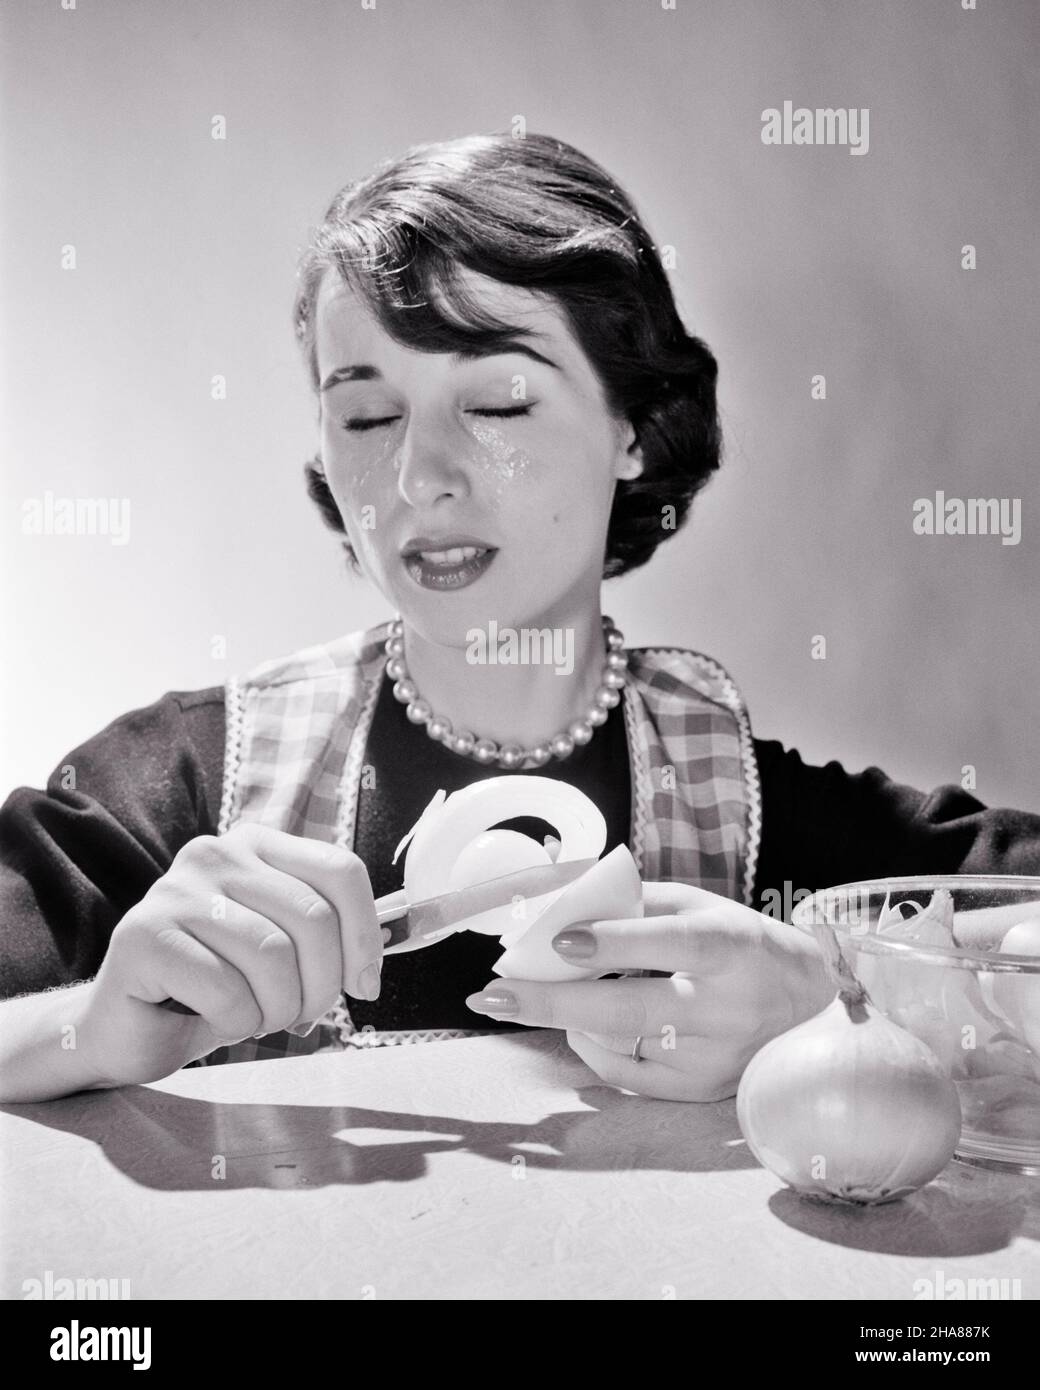 1950s 1960s WOMAN HOUSEWIFE COOK REACTING TO PEELING ONION CRYING TEARS WATERING BURNING SENSATION EYES CLOSED - h2828 DEB001 HARS CHEMISTRY FEMALES STUDIO SHOT GROWNUP TEARS HOME LIFE PREPARING COPY SPACE LADIES PERSONS GROWN-UP CRY B&W BRUNETTE HOMEMAKER PEOPLE STORY HOMEMAKERS HEAD AND SHOULDERS ONION HOUSEWIVES IRRITATION NOURISHMENT STYLISH ACID DEB001 IRRITANT REACTING SENSATION PEELING CHEMICAL REACTION EMOTION EMOTIONAL EMOTIONS MID-ADULT MID-ADULT WOMAN REACTION STINGING SULFUR YOUNG ADULT WOMAN BLACK AND WHITE CAUCASIAN ETHNICITY OLD FASHIONED ONIONS Stock Photo